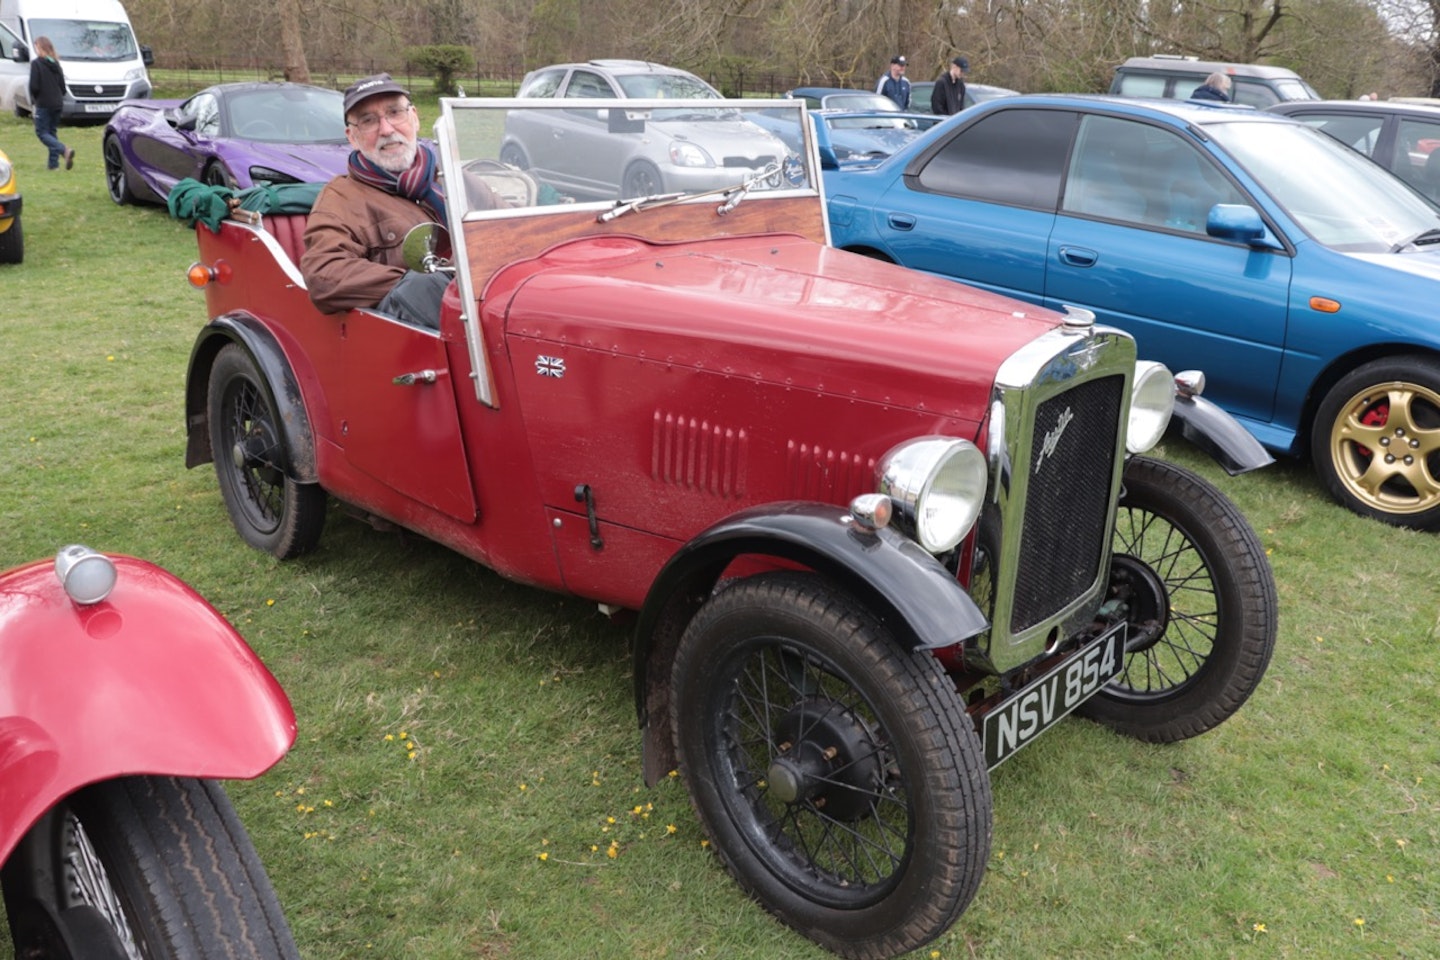 Eric Smith, from Dalston in Cumbria, in his 1936 Austin Seven Special.